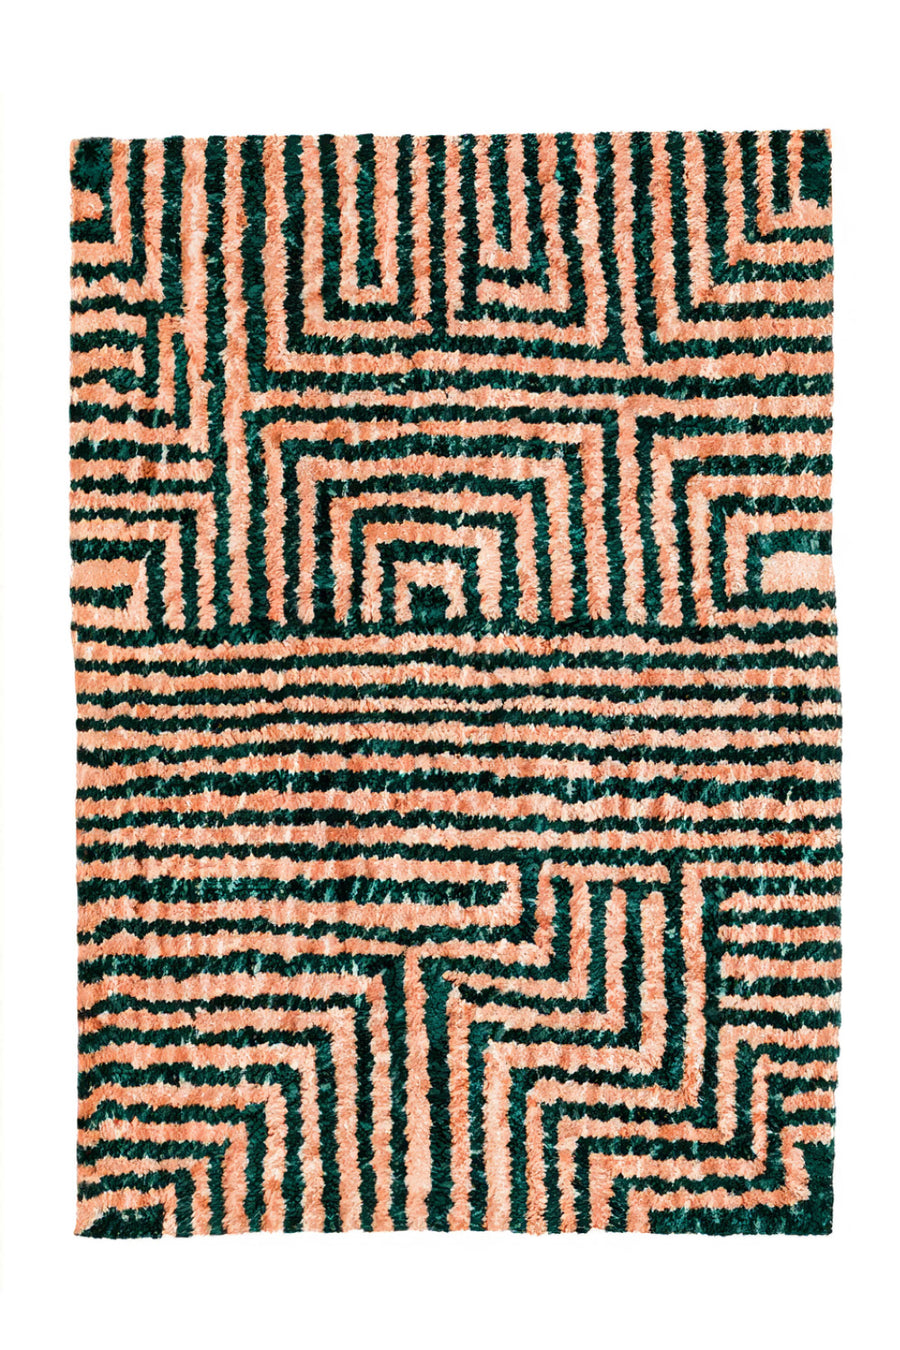 green and tan plush tufted rug with a maze design